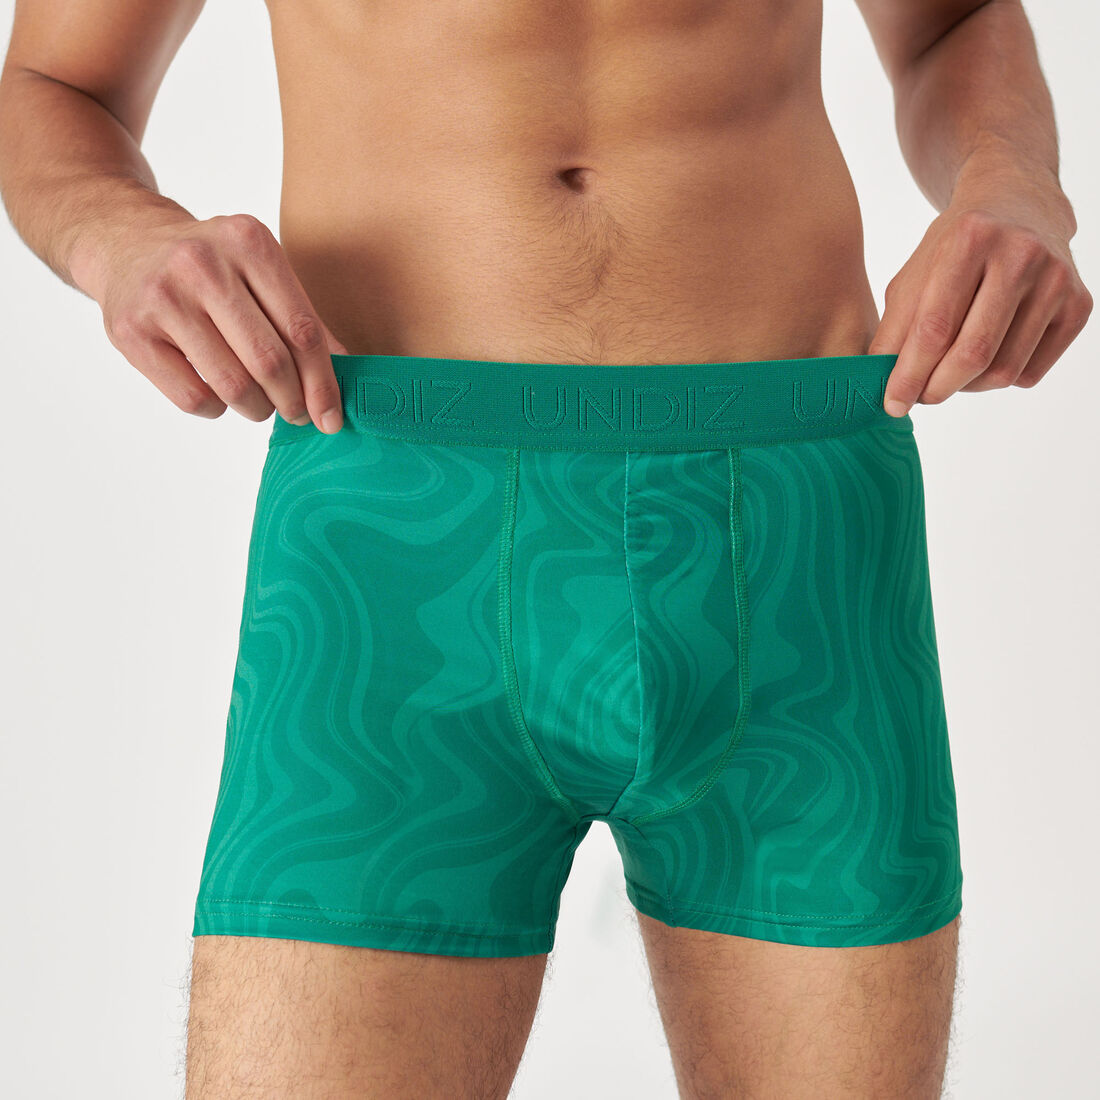 abstract patterned boxer shorts;